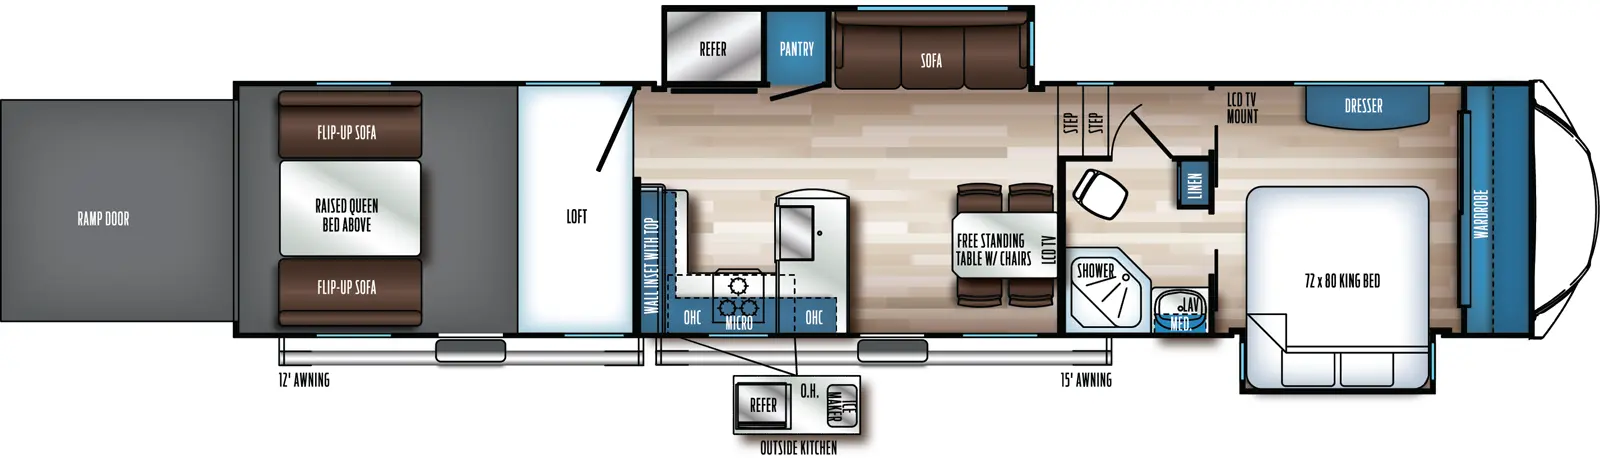 The 373BS13 has two slideouts, two entries, and one ramp door. Exterior features outside kitchen with refrigerator, overhead cabinet, and ice maker, 12 foot awning, and 15 foot awning. Interior layout front to back: front wardrobe, door side king bed slideout, and off-door side dresser and LCD TV mount; door side pass through full bathroom with linen closet and medicine cabinet; steps down to main living area; off-door side slideout with sofa, pantry and refrigerator; door side free-standing table with chairs, LCD TV along inner wall, entry door, peninsula kitchen counter with sink wraps to door side with overhead cabinet, microwave, cooktop, and wraps to inner wall with wall inset with top; rear garage with loft, second entry, and opposing flip-up sofas with raised queen bed above.